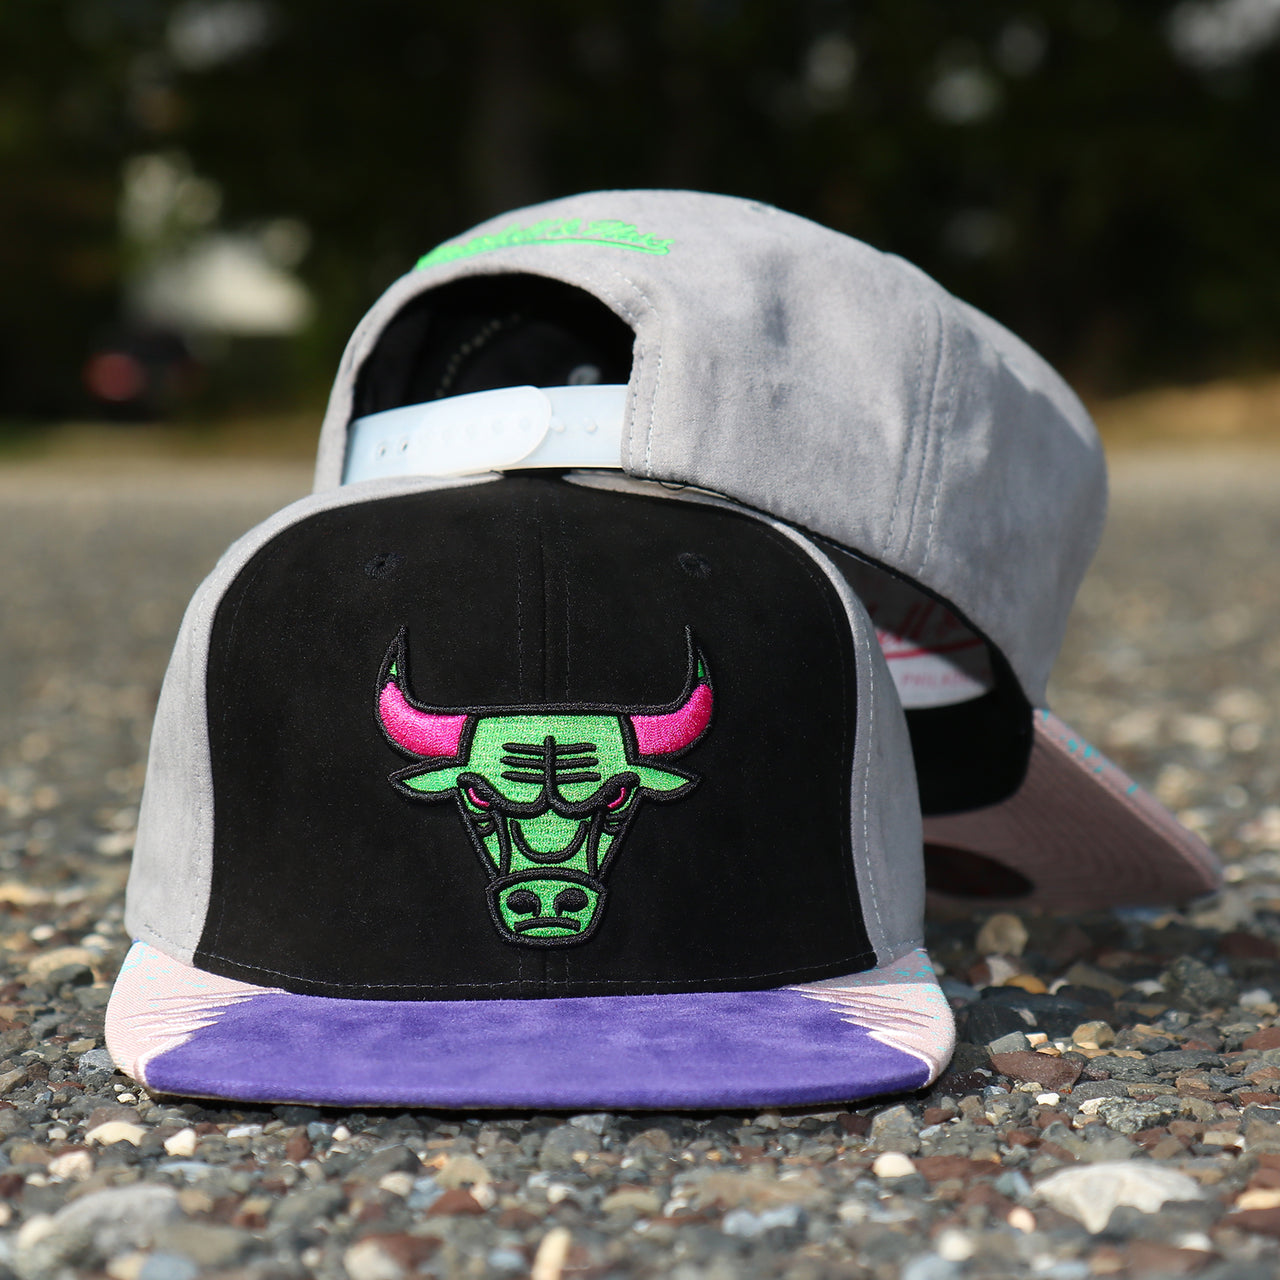 Chicago Bulls “NBA Day 5” Bel Air 5s Matching Snapback Hat | Snapback to match Bel Air 5s